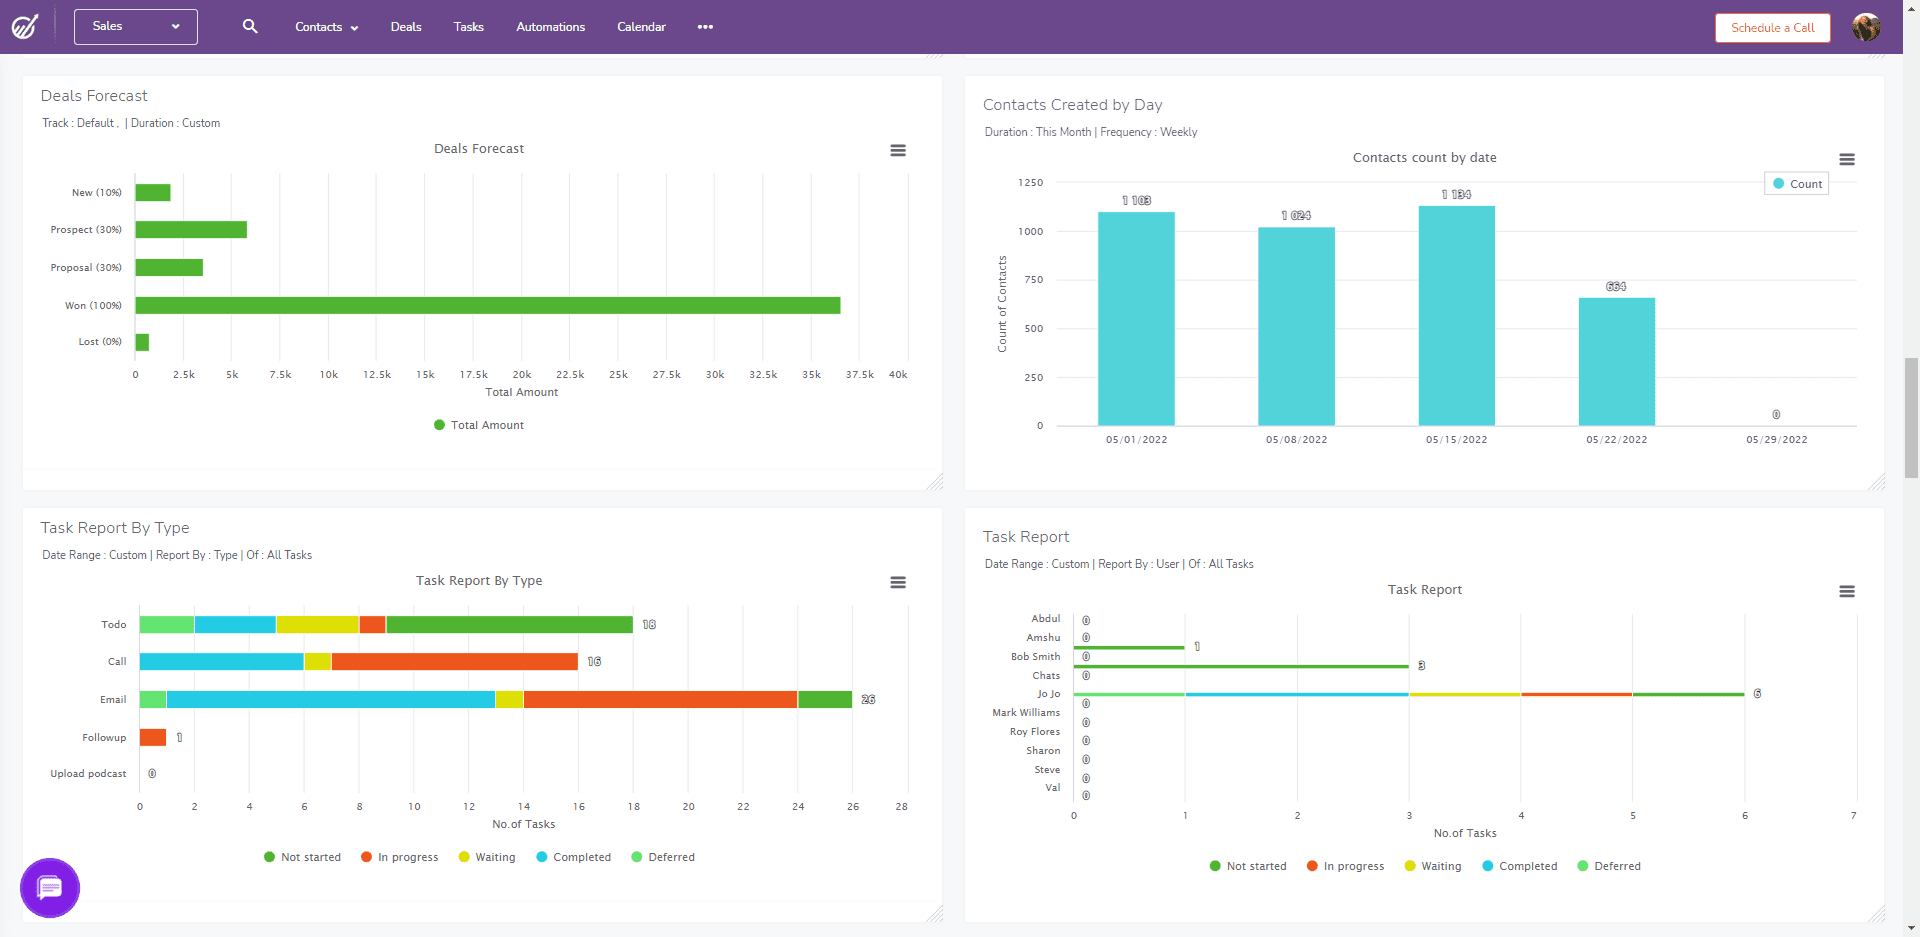 Sales KPI dashboard example from EngageBay